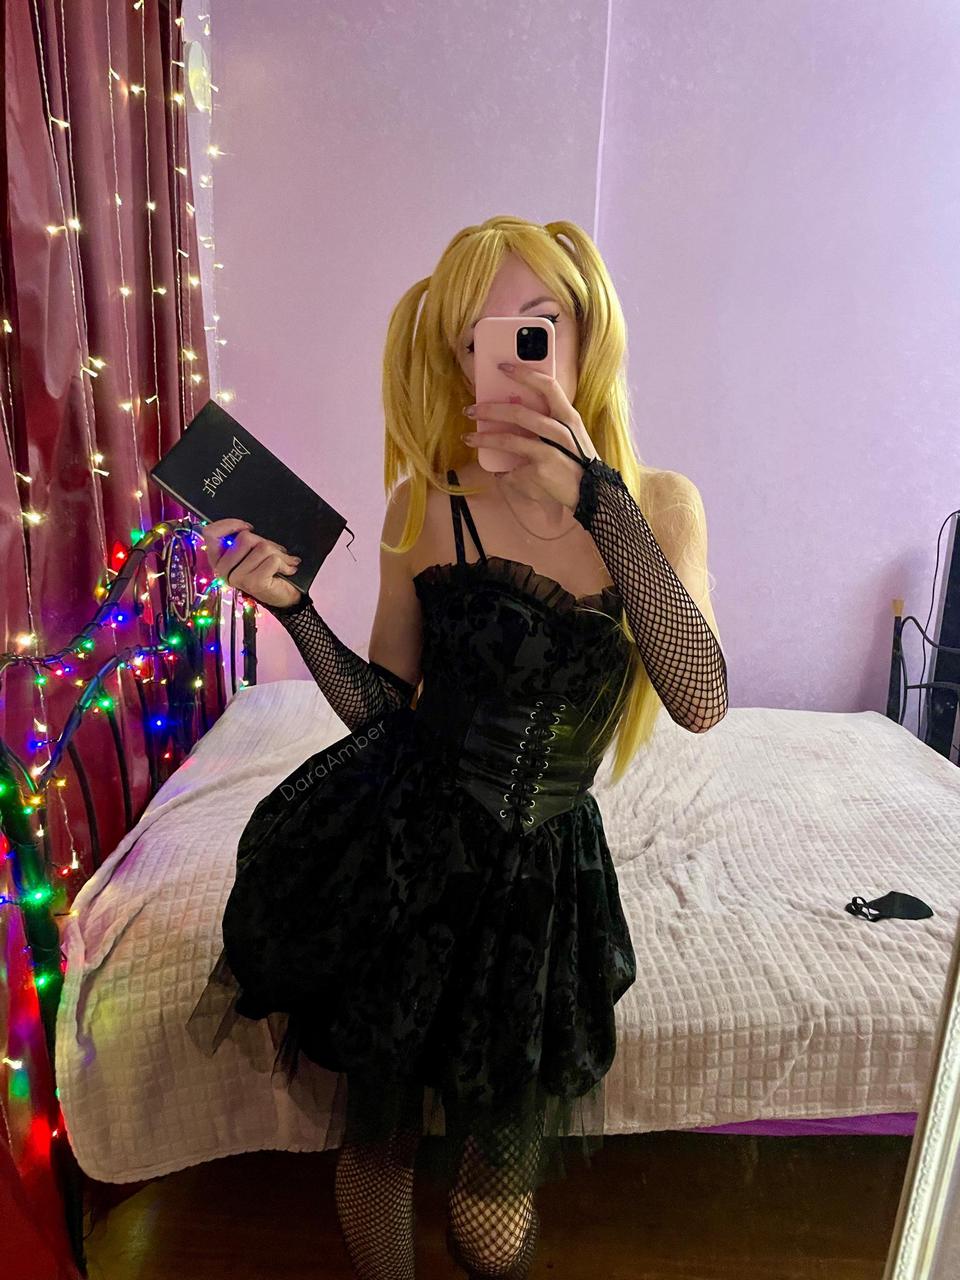 Amane Misa From Death Note By Dara Ambe